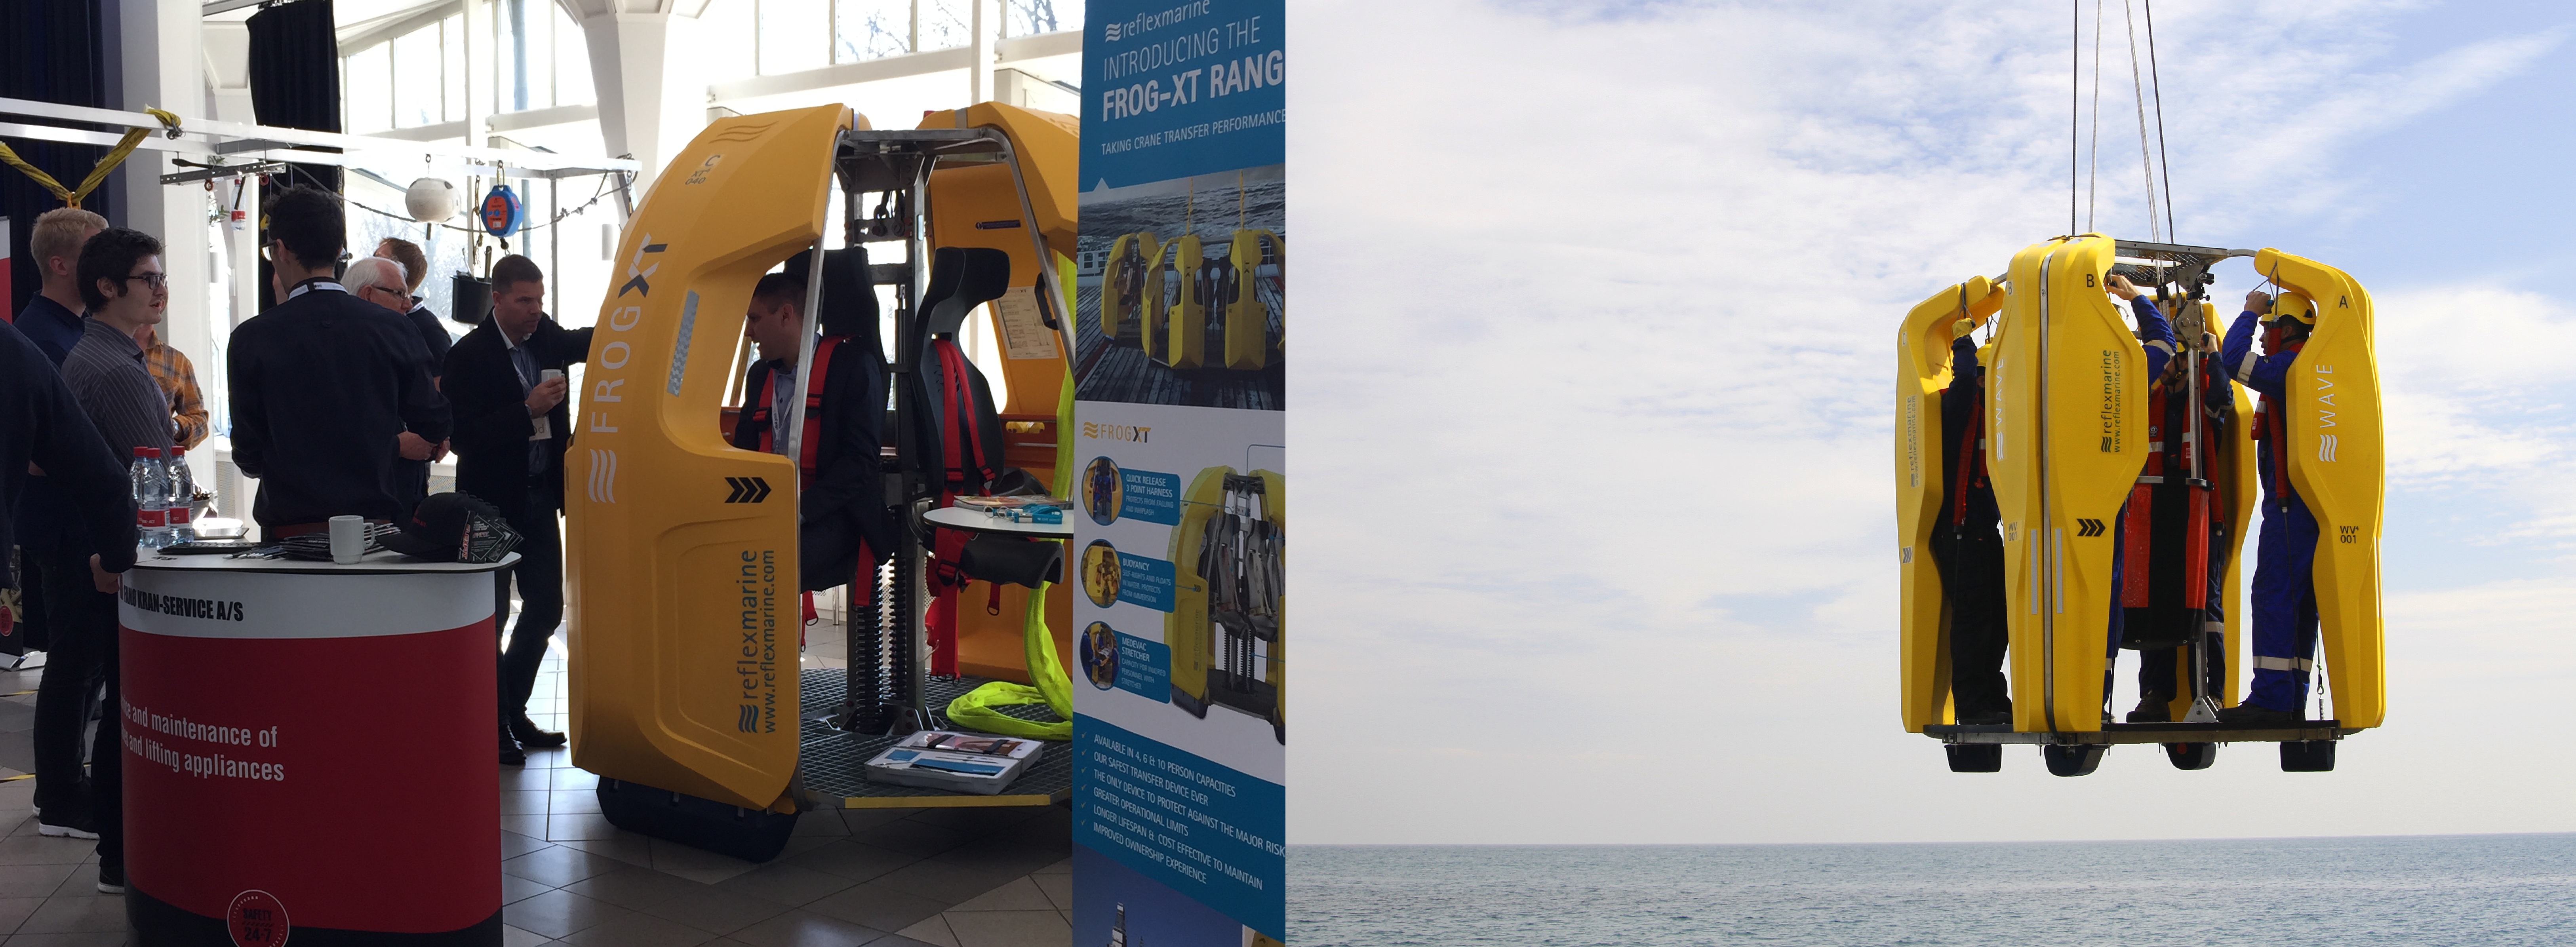 Read TASK FORCE ZERO OFFSHORE SAFETY CONFERENCE 2016